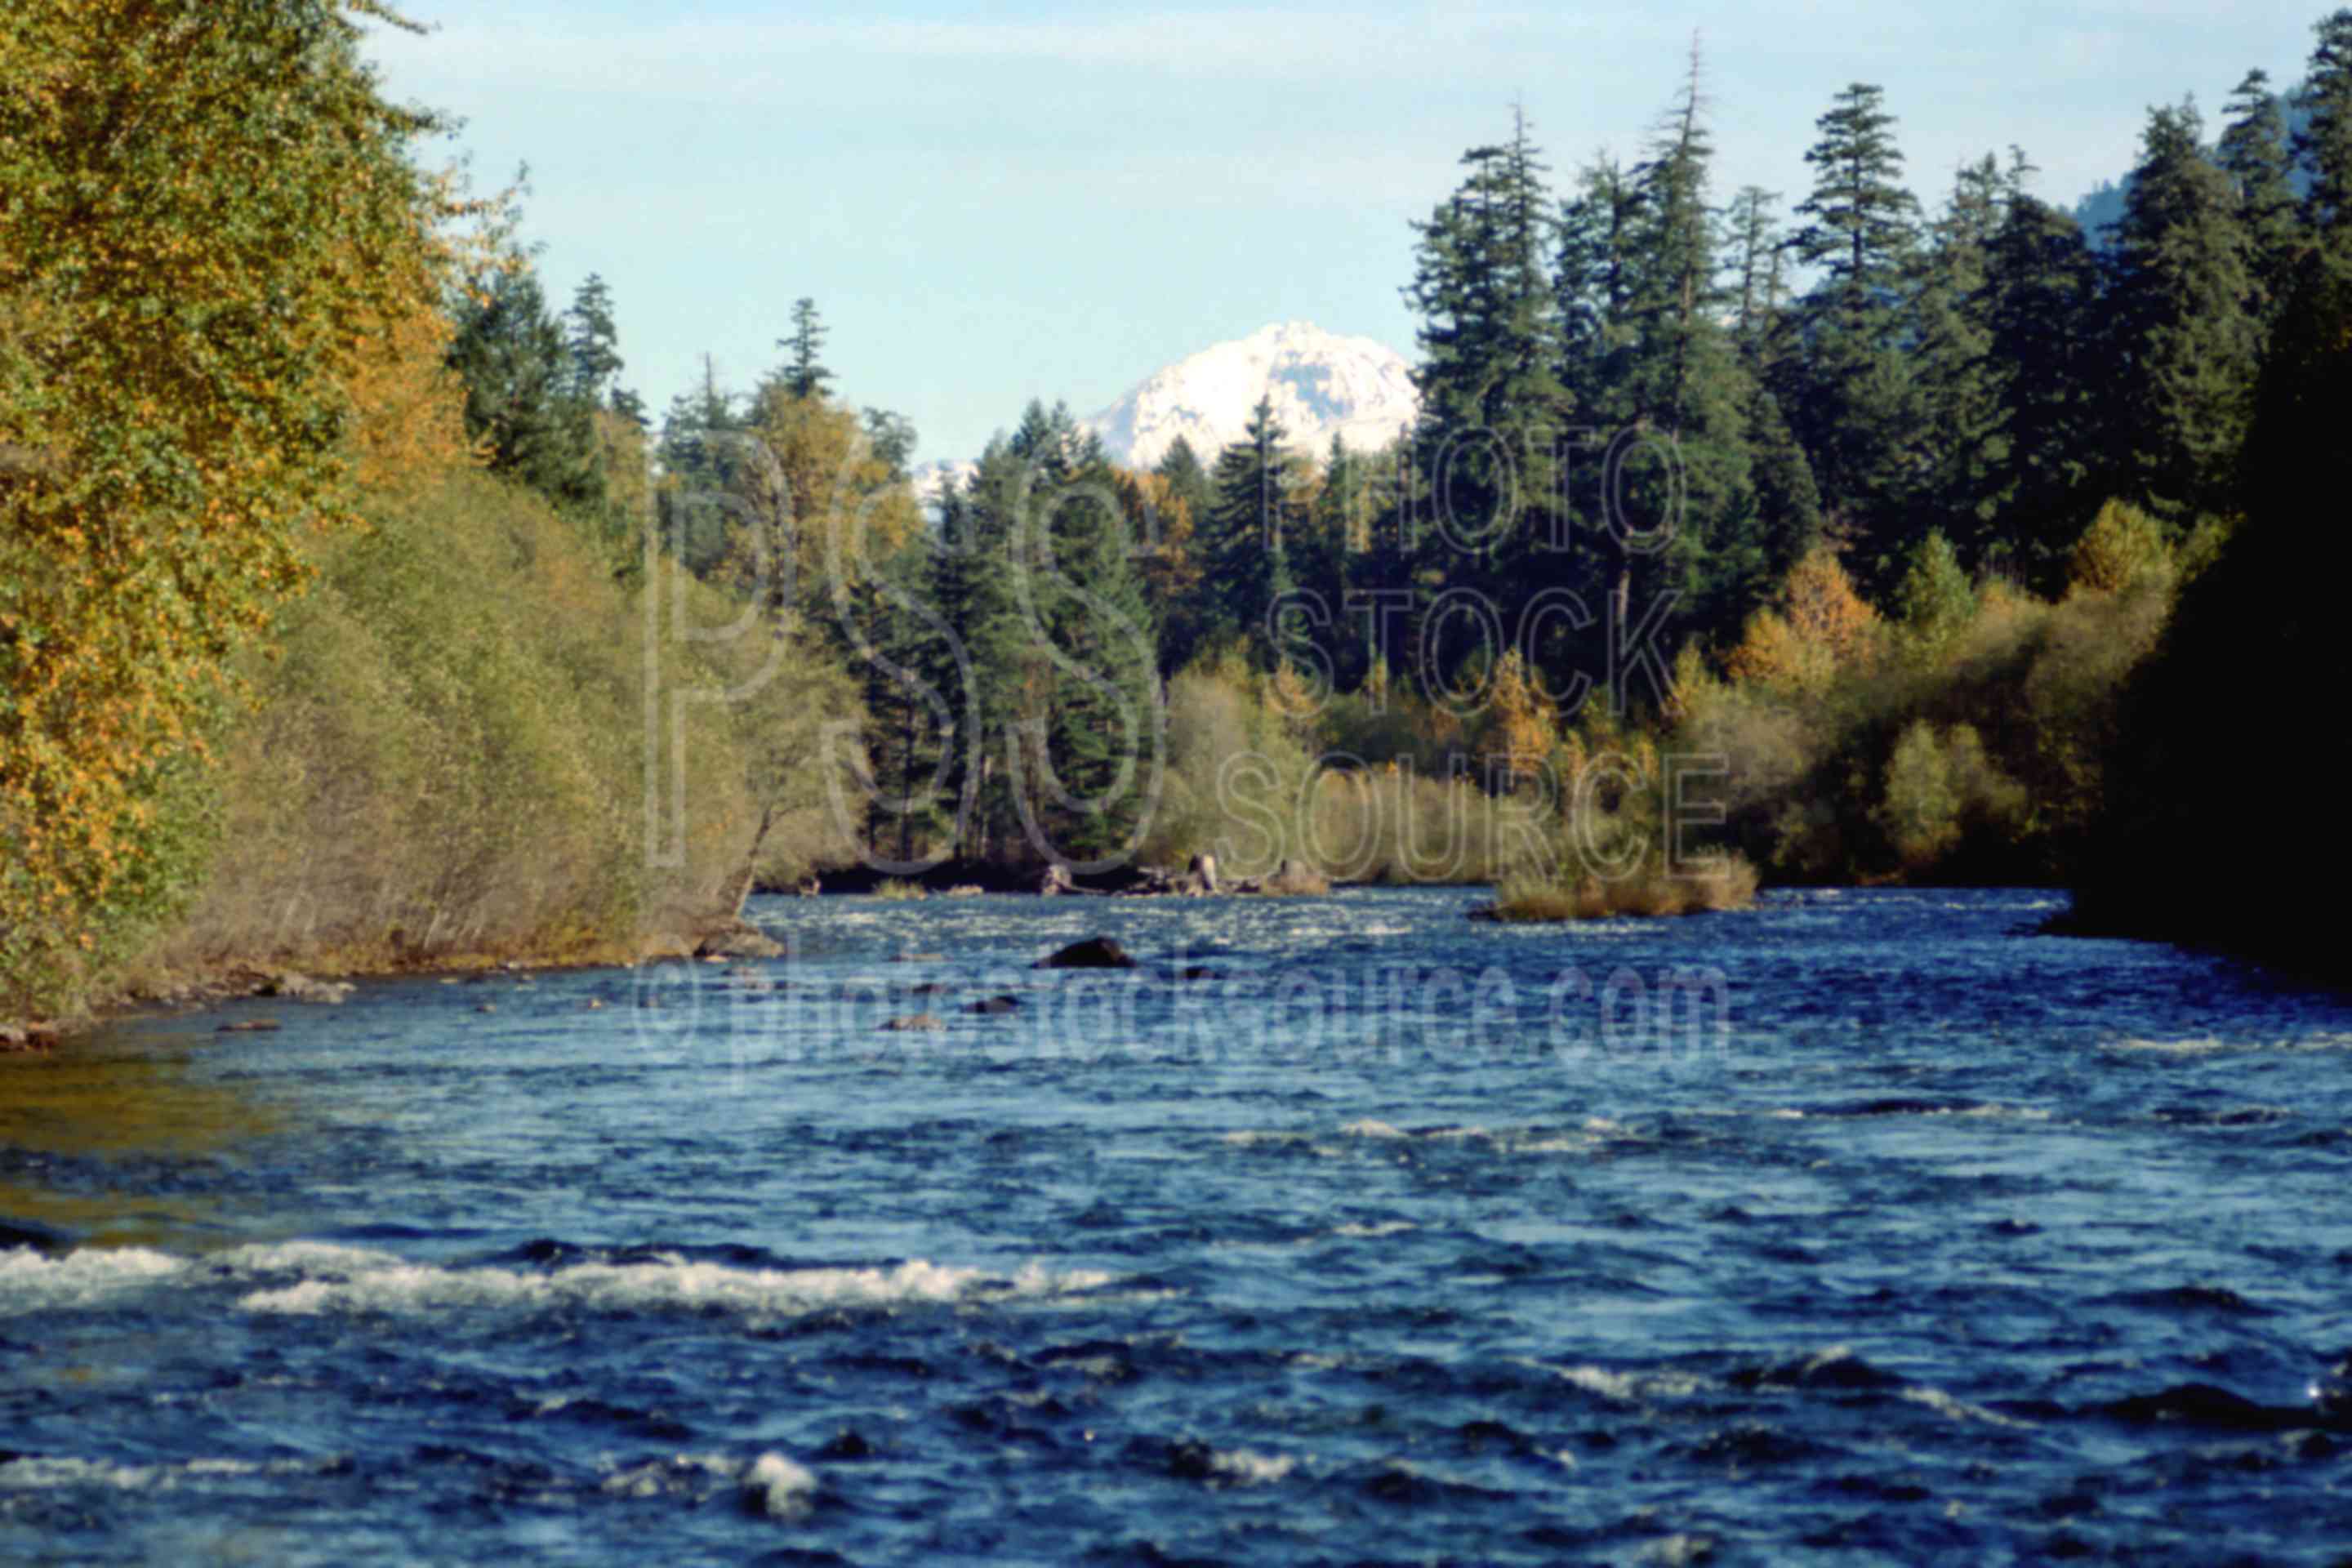 North Sister, McKenzie River,mckenzie river,north sister,river,usas,lakes rivers,mountains